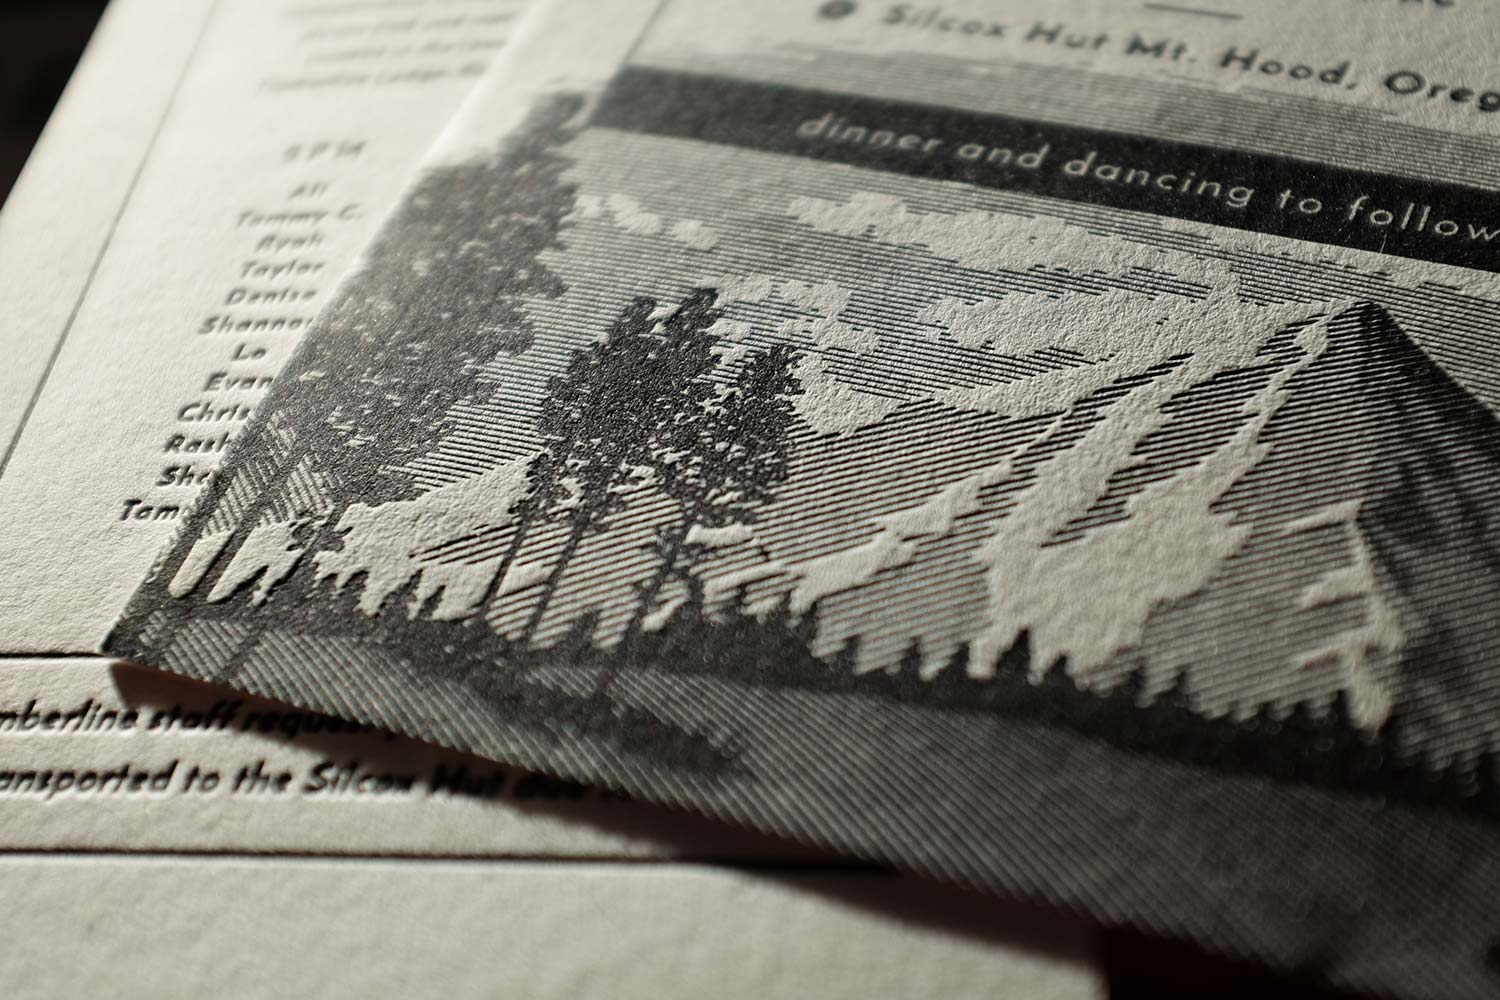 The paper texture of Neenah Cotton